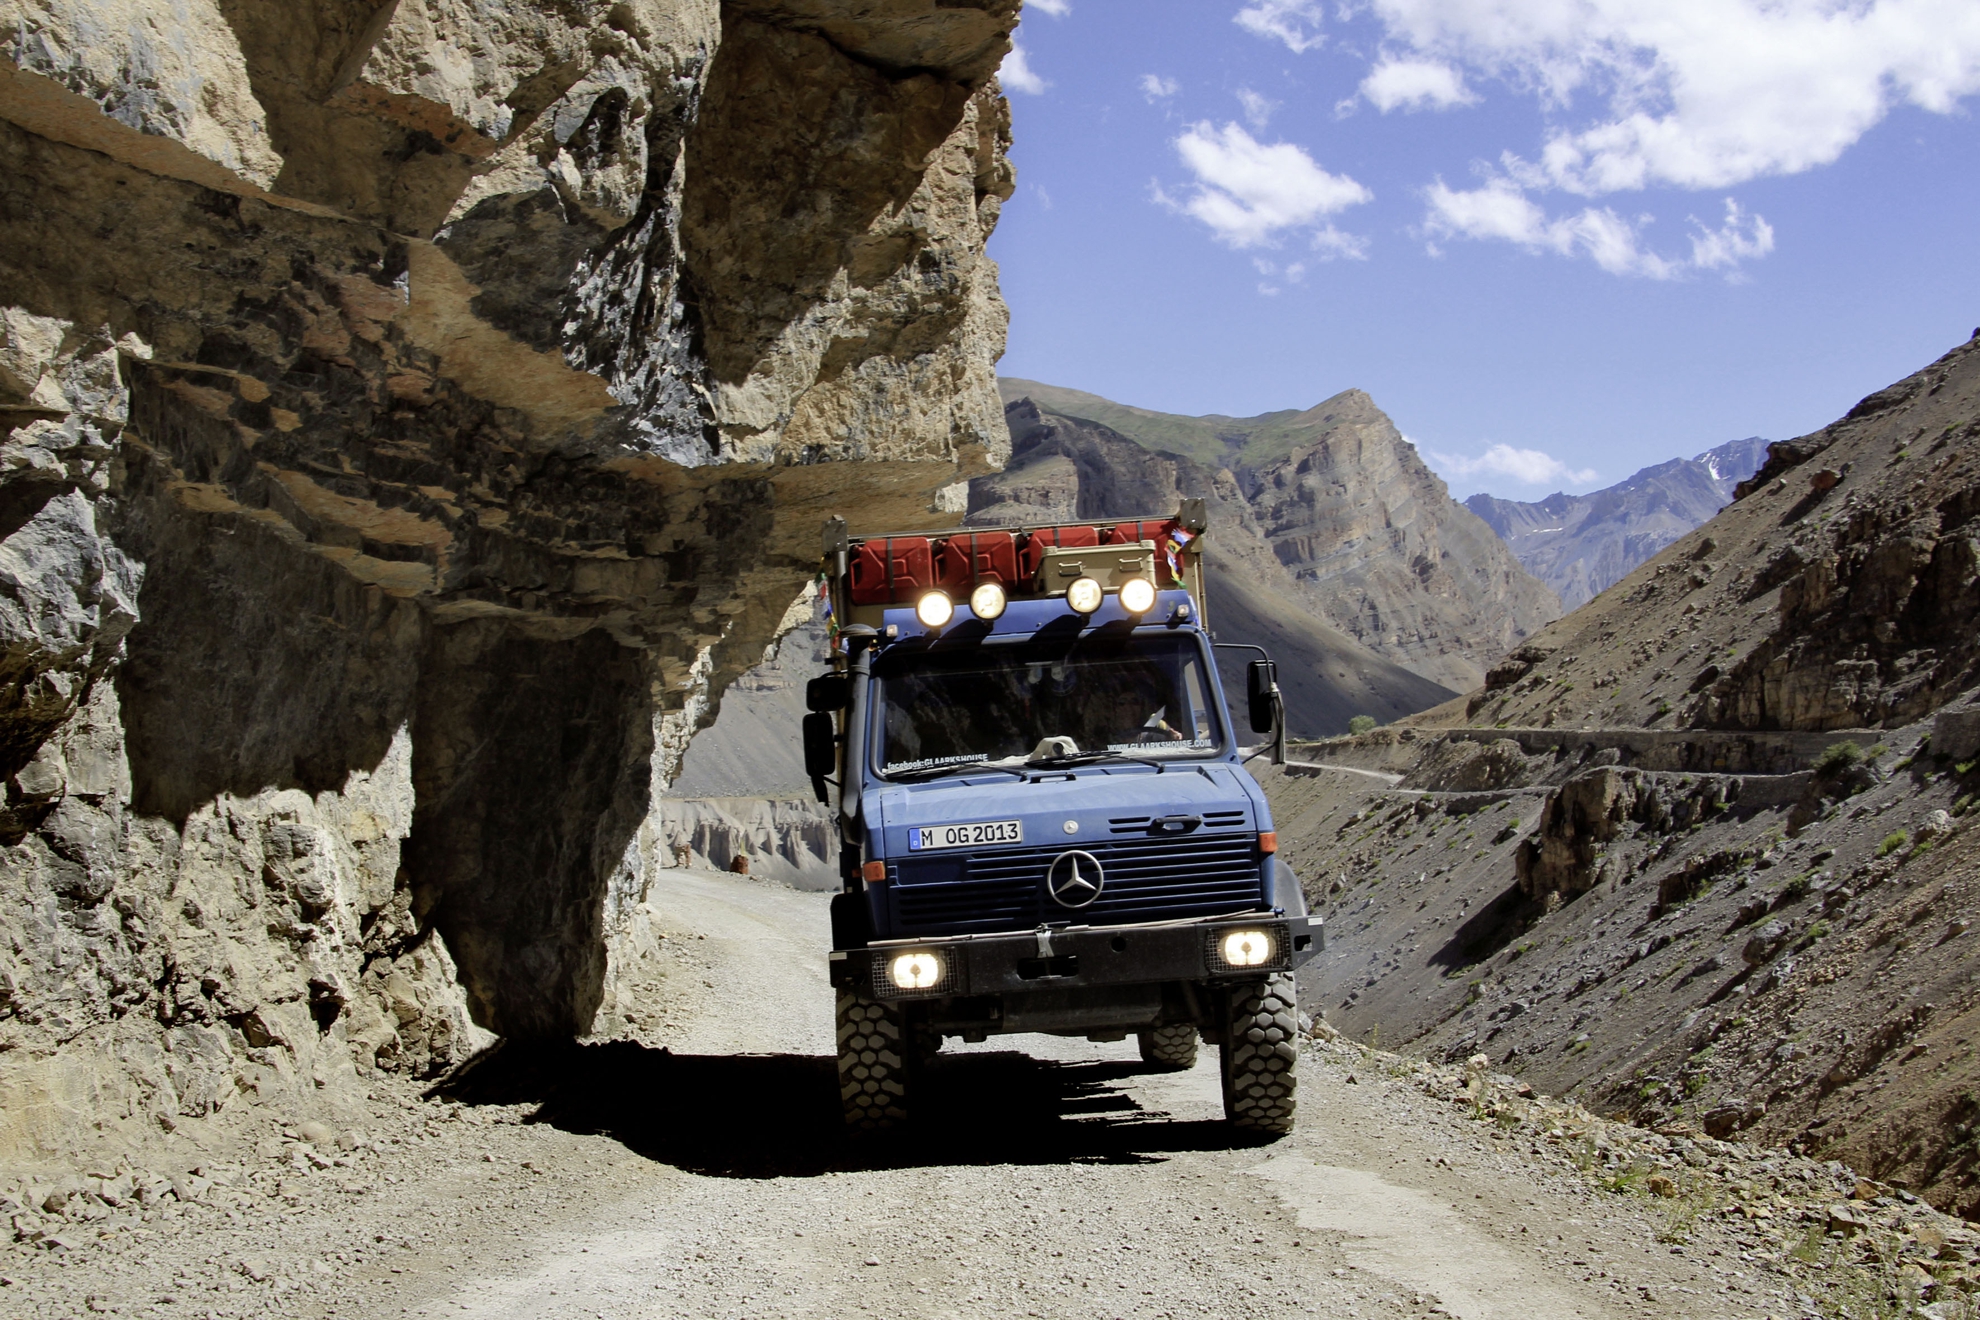 Driving through the Himalayas with the Unimog